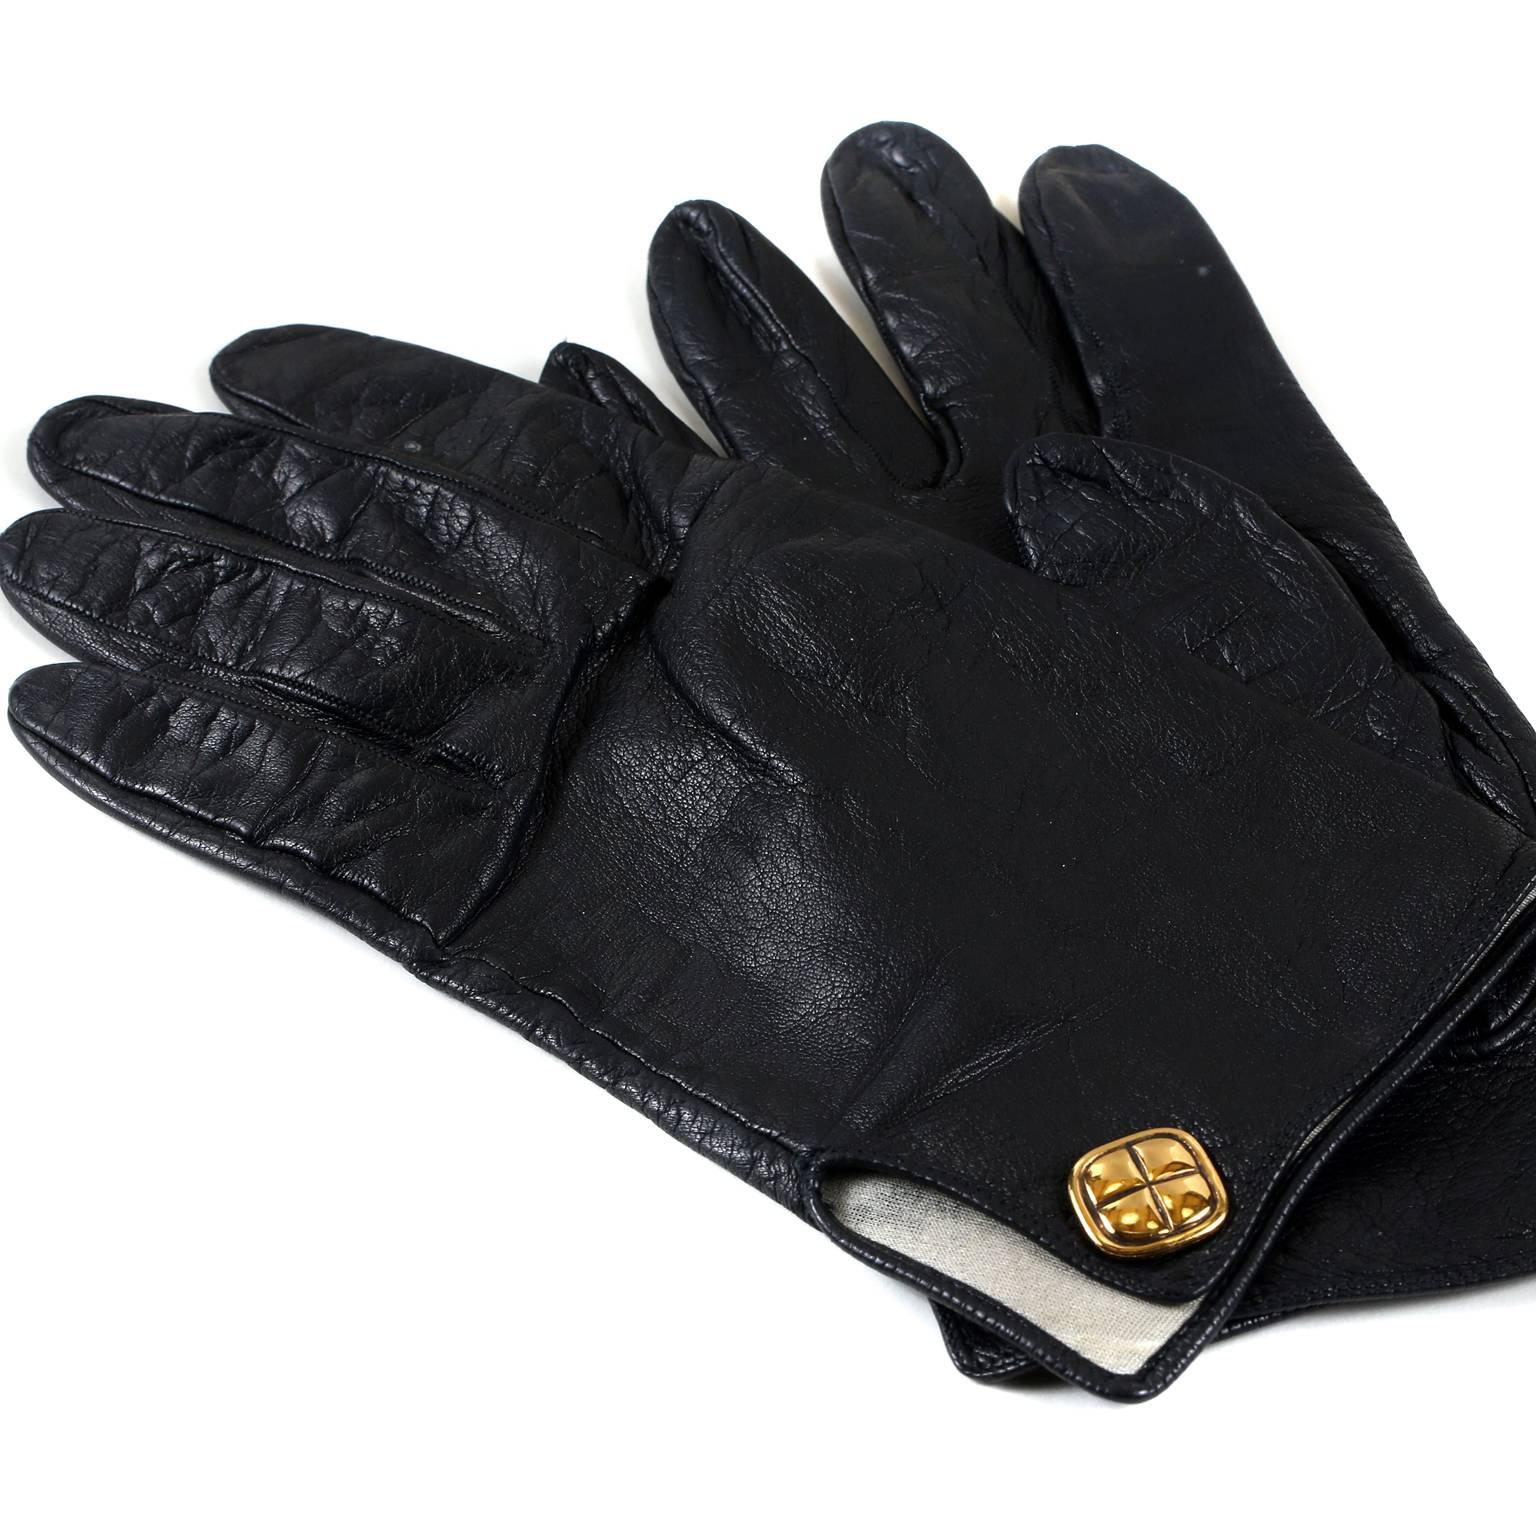 Women's Chanel Black Leather Gloves- size 7